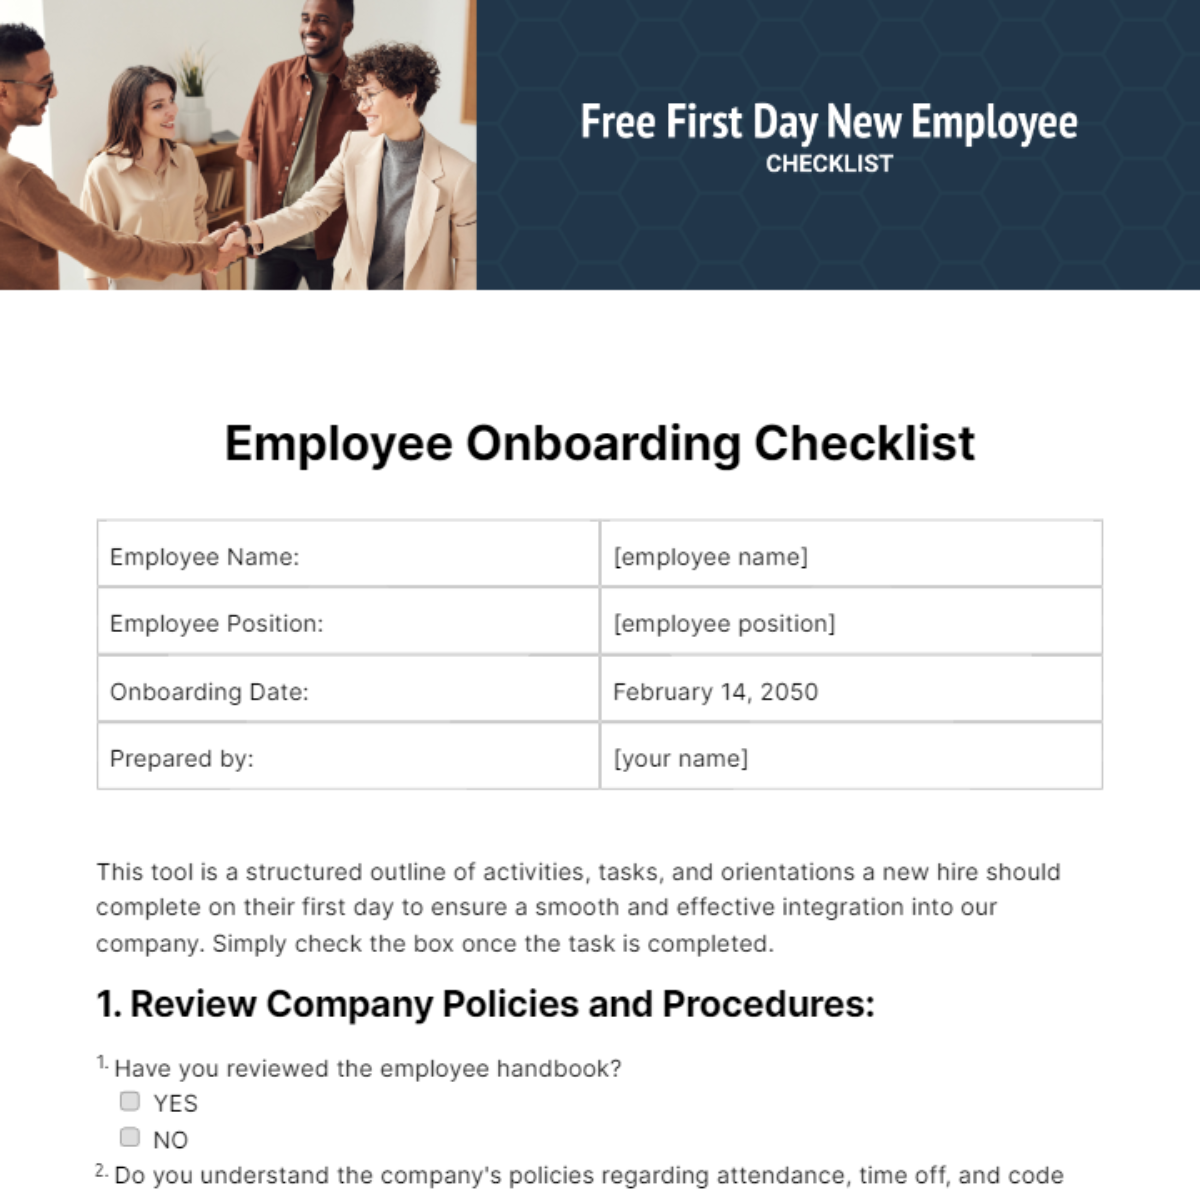 Free Frist Day New Employee Checklist Template